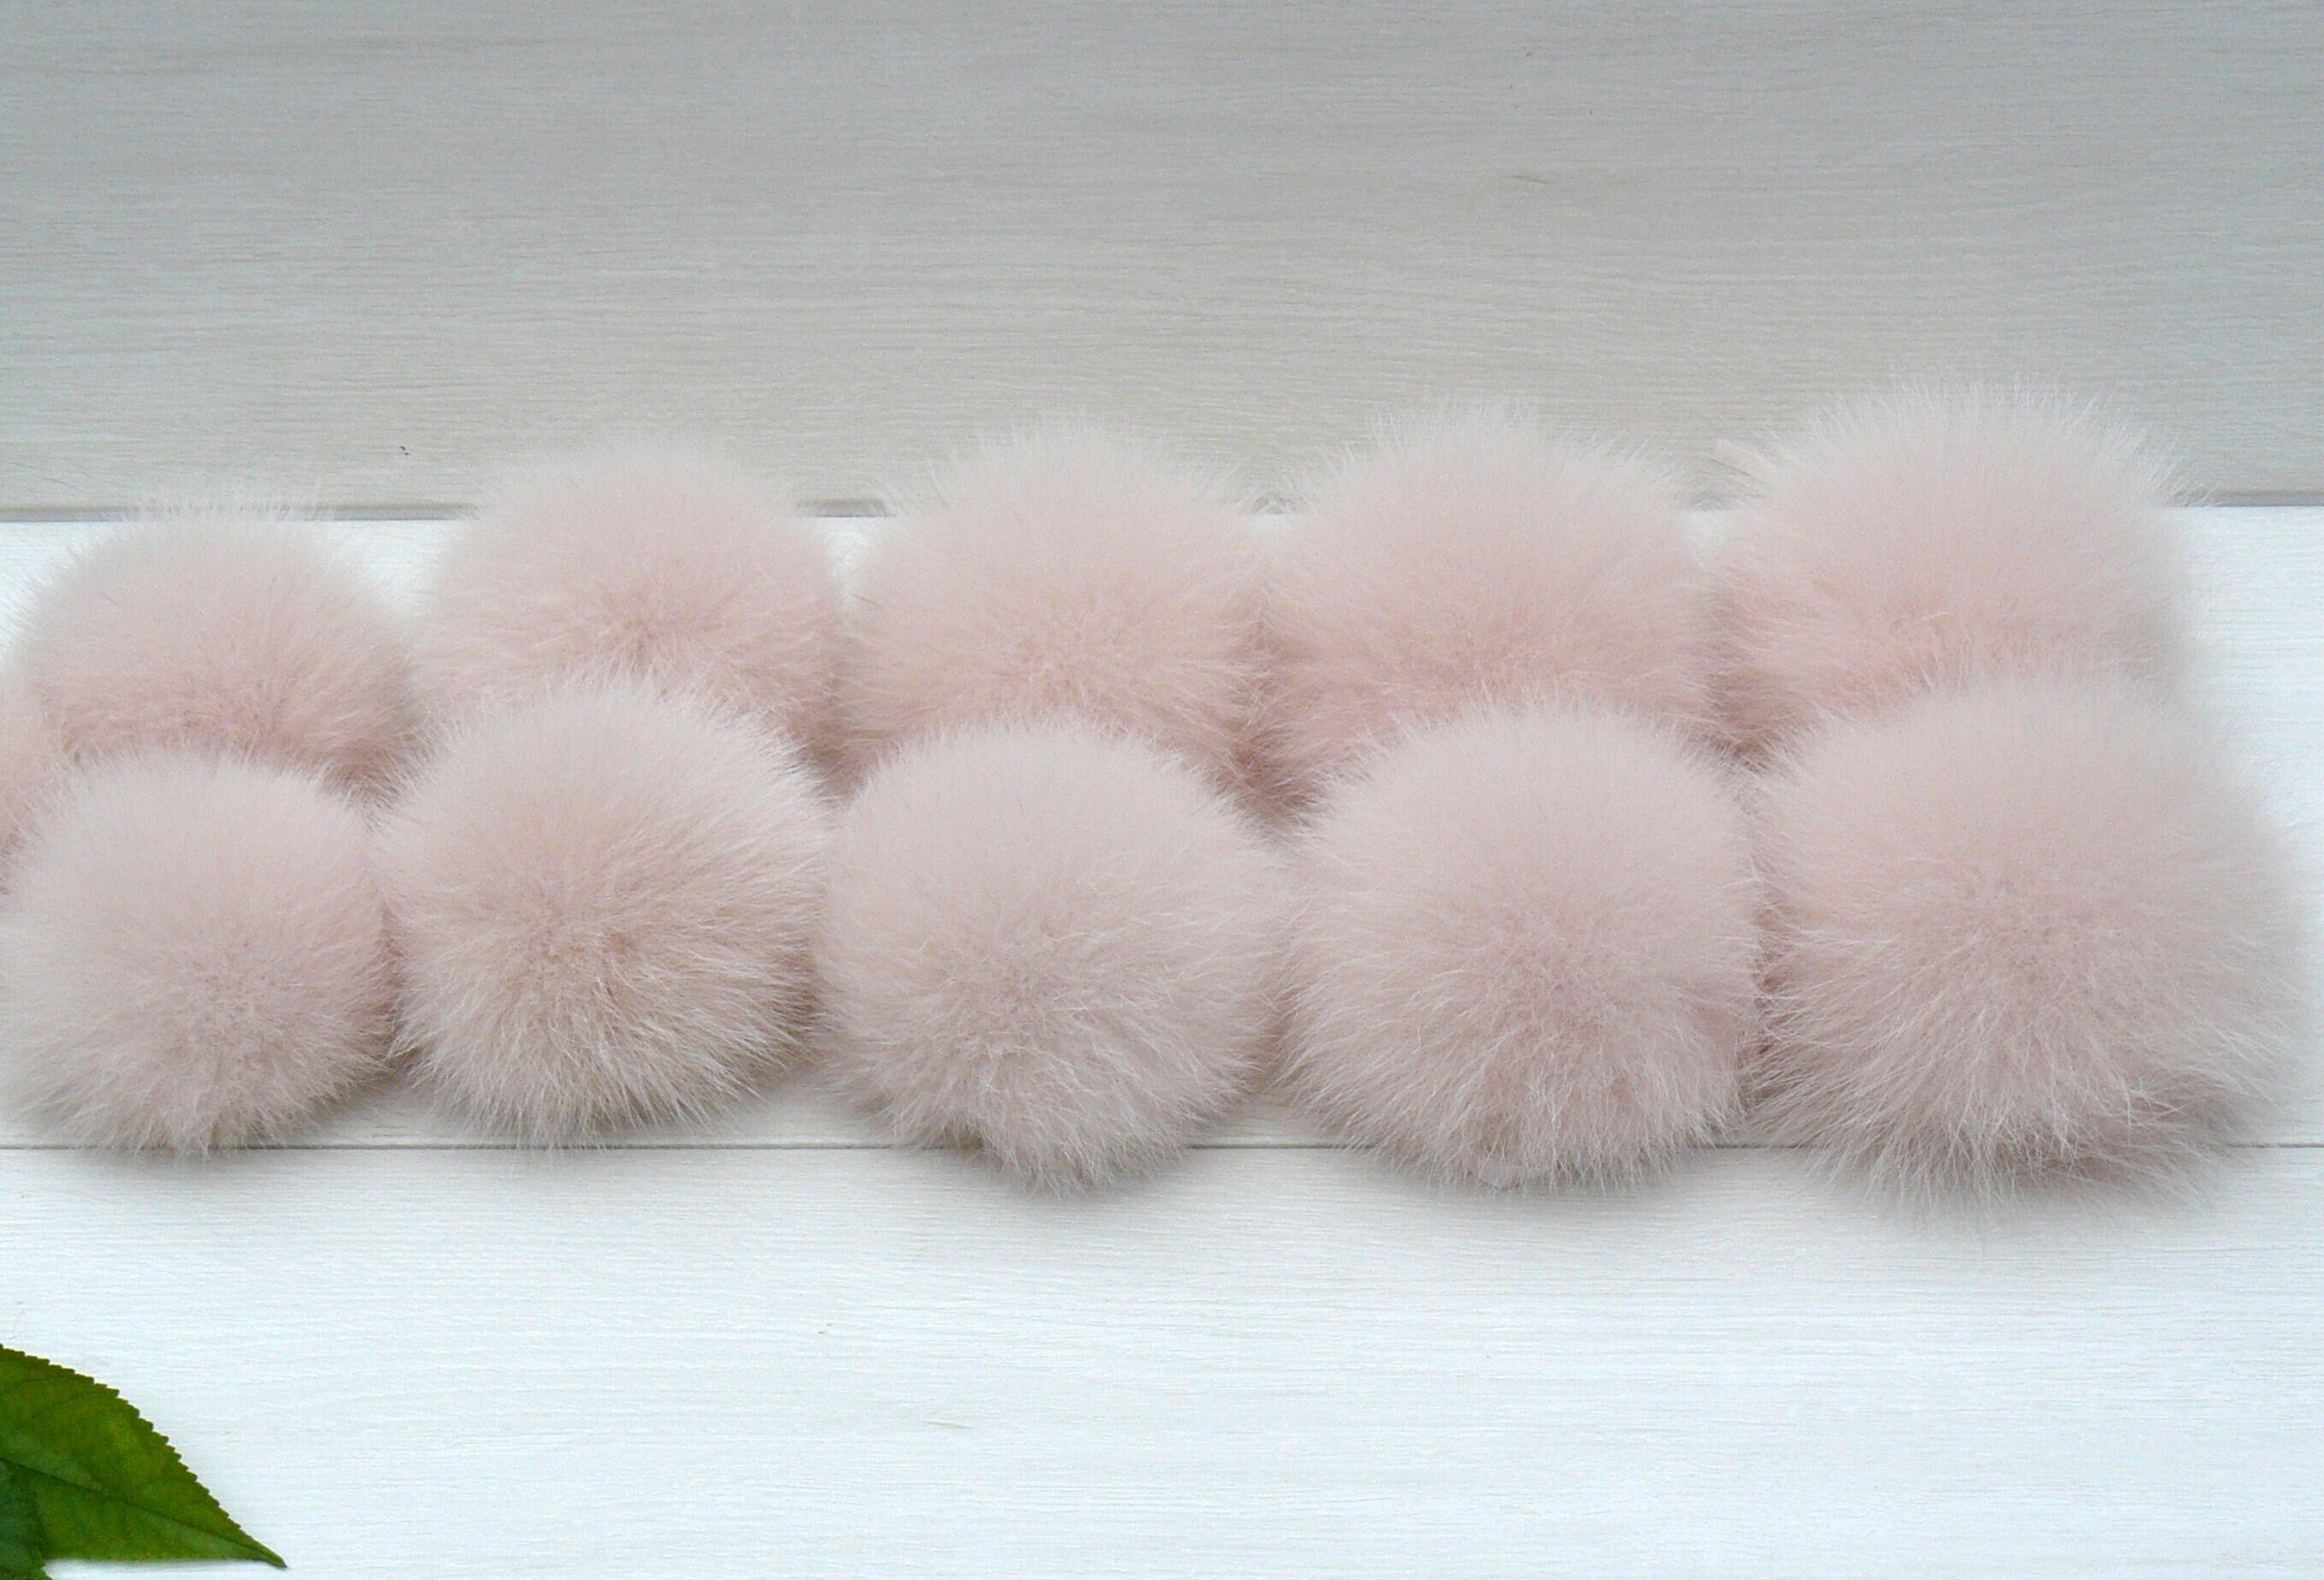  3.15 Inches Faux Fur Pom Pom Balls DIY Faux Fox Fur Fluffy Pompoms  for Hats Scarves Gloves Bags Accessories